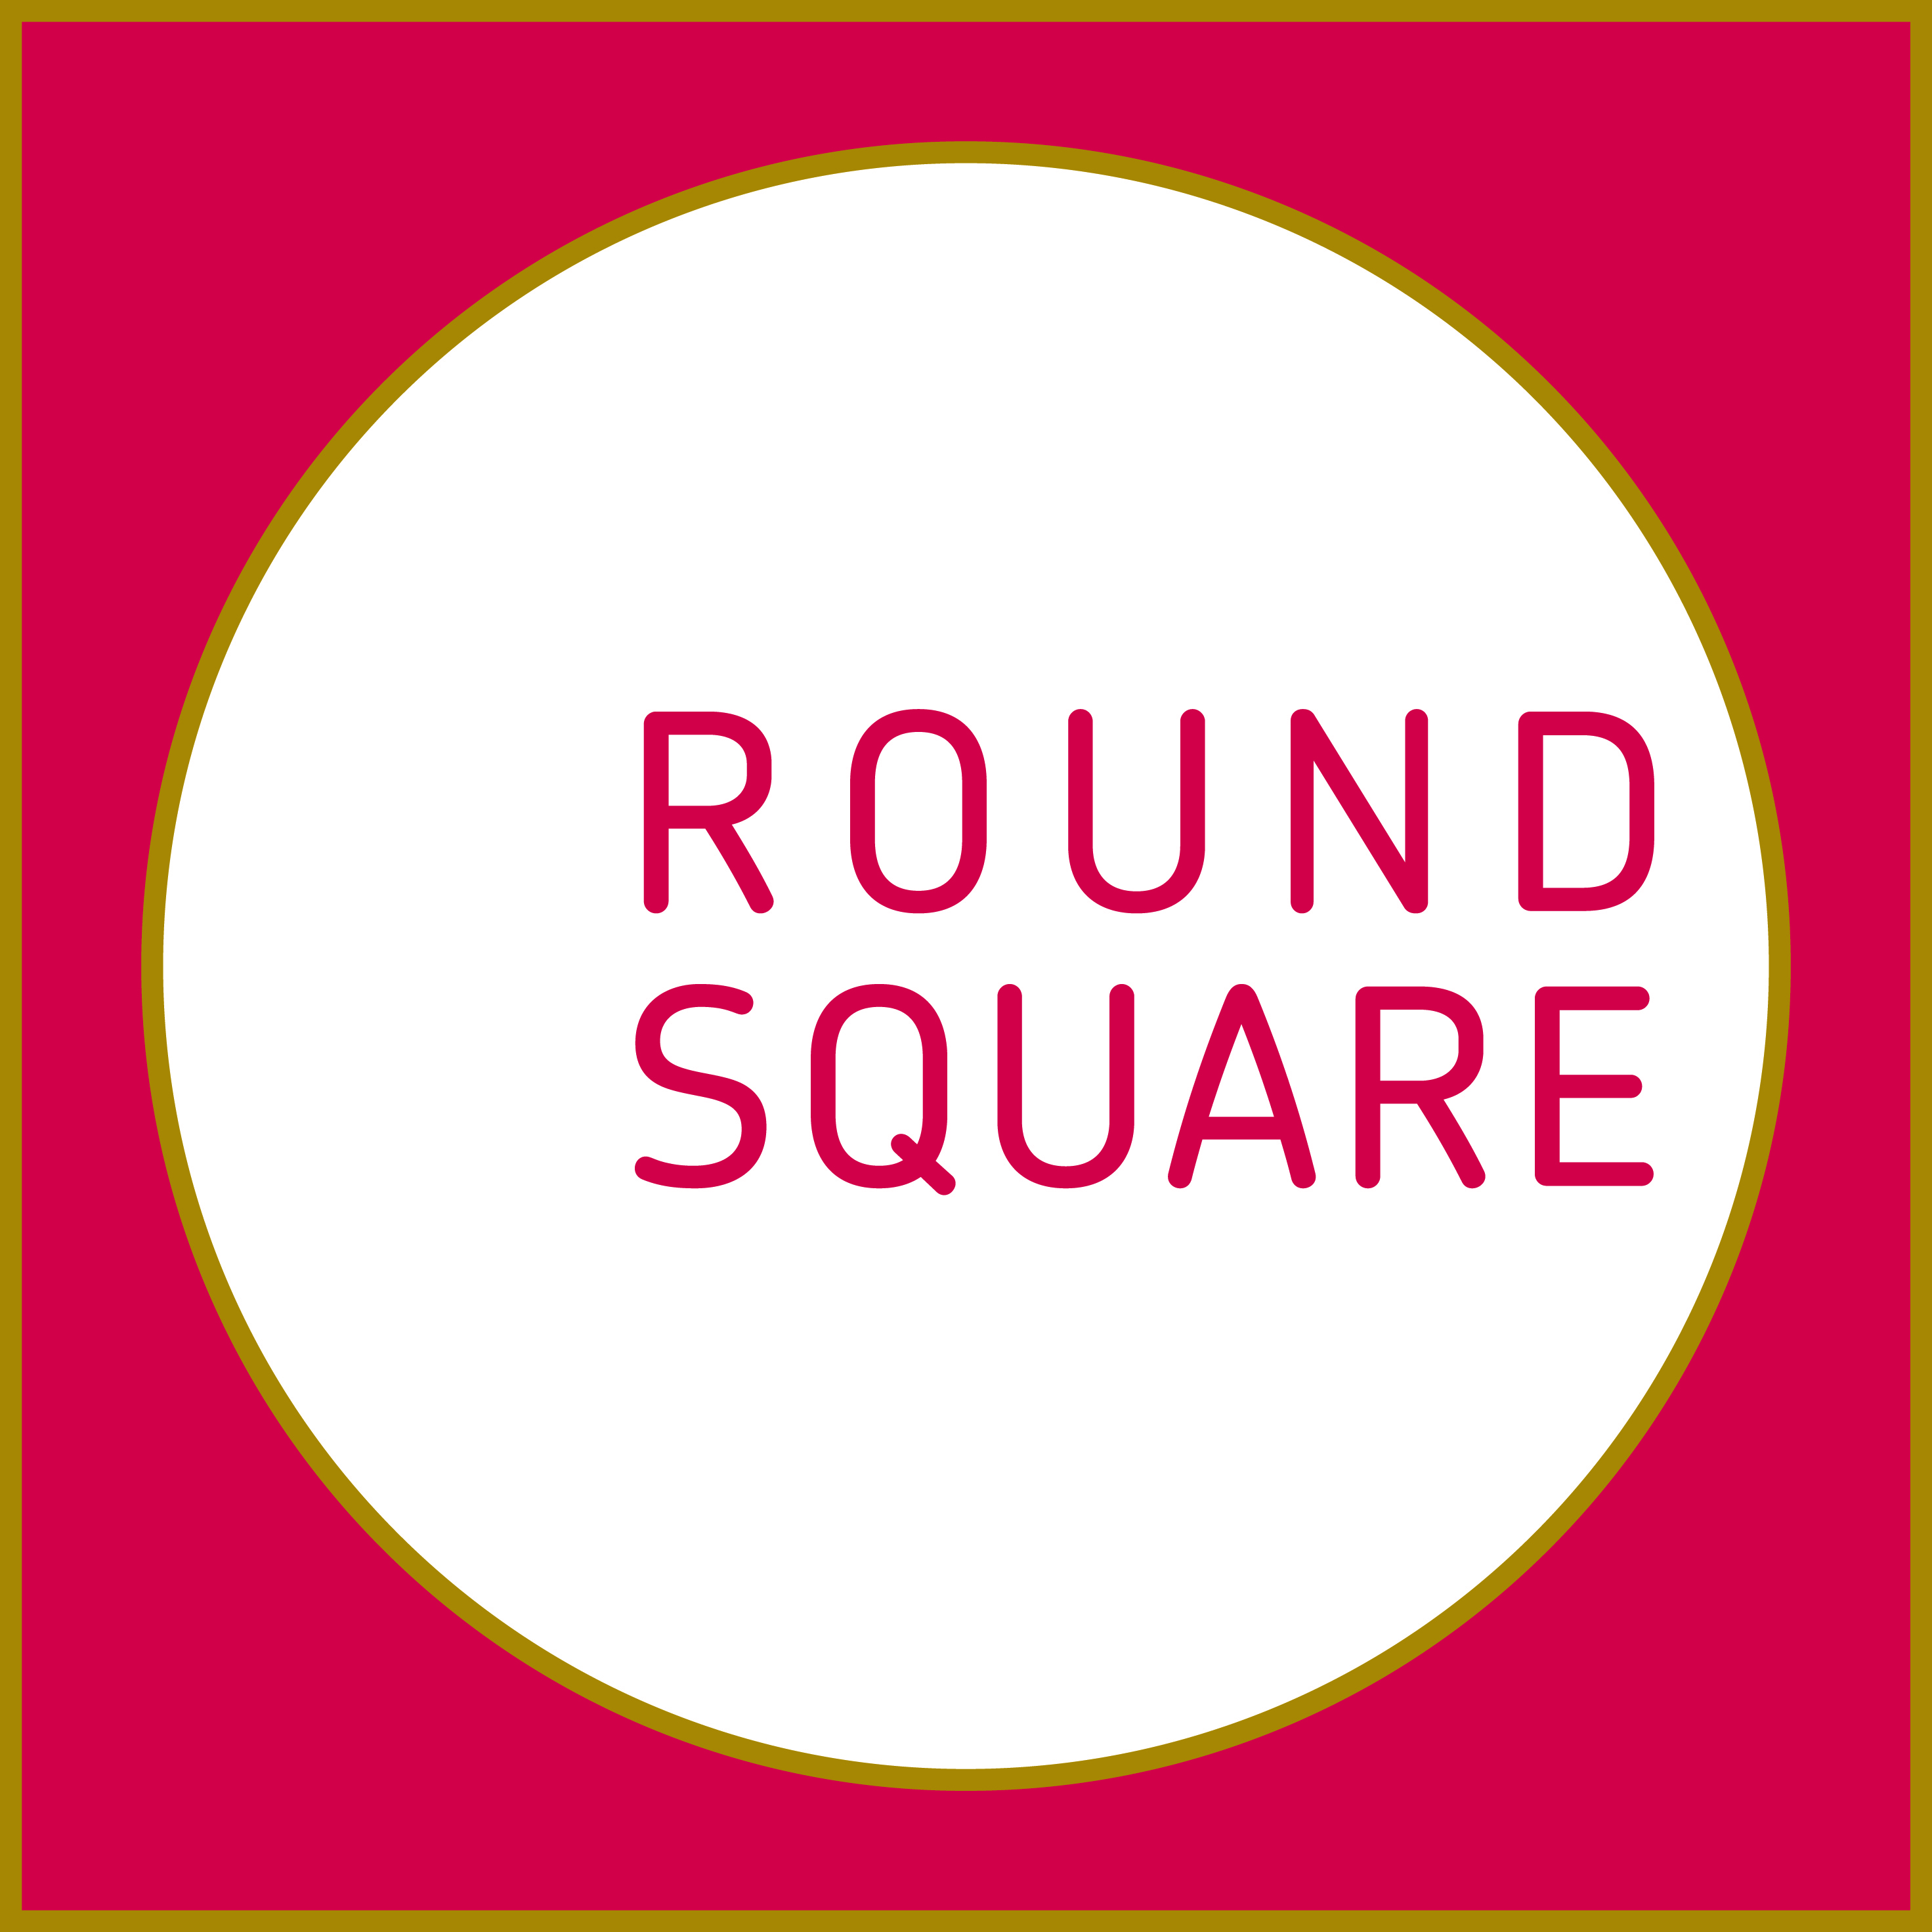 File:New logo Round Square with Gold.jpg - Wikimedia Commons